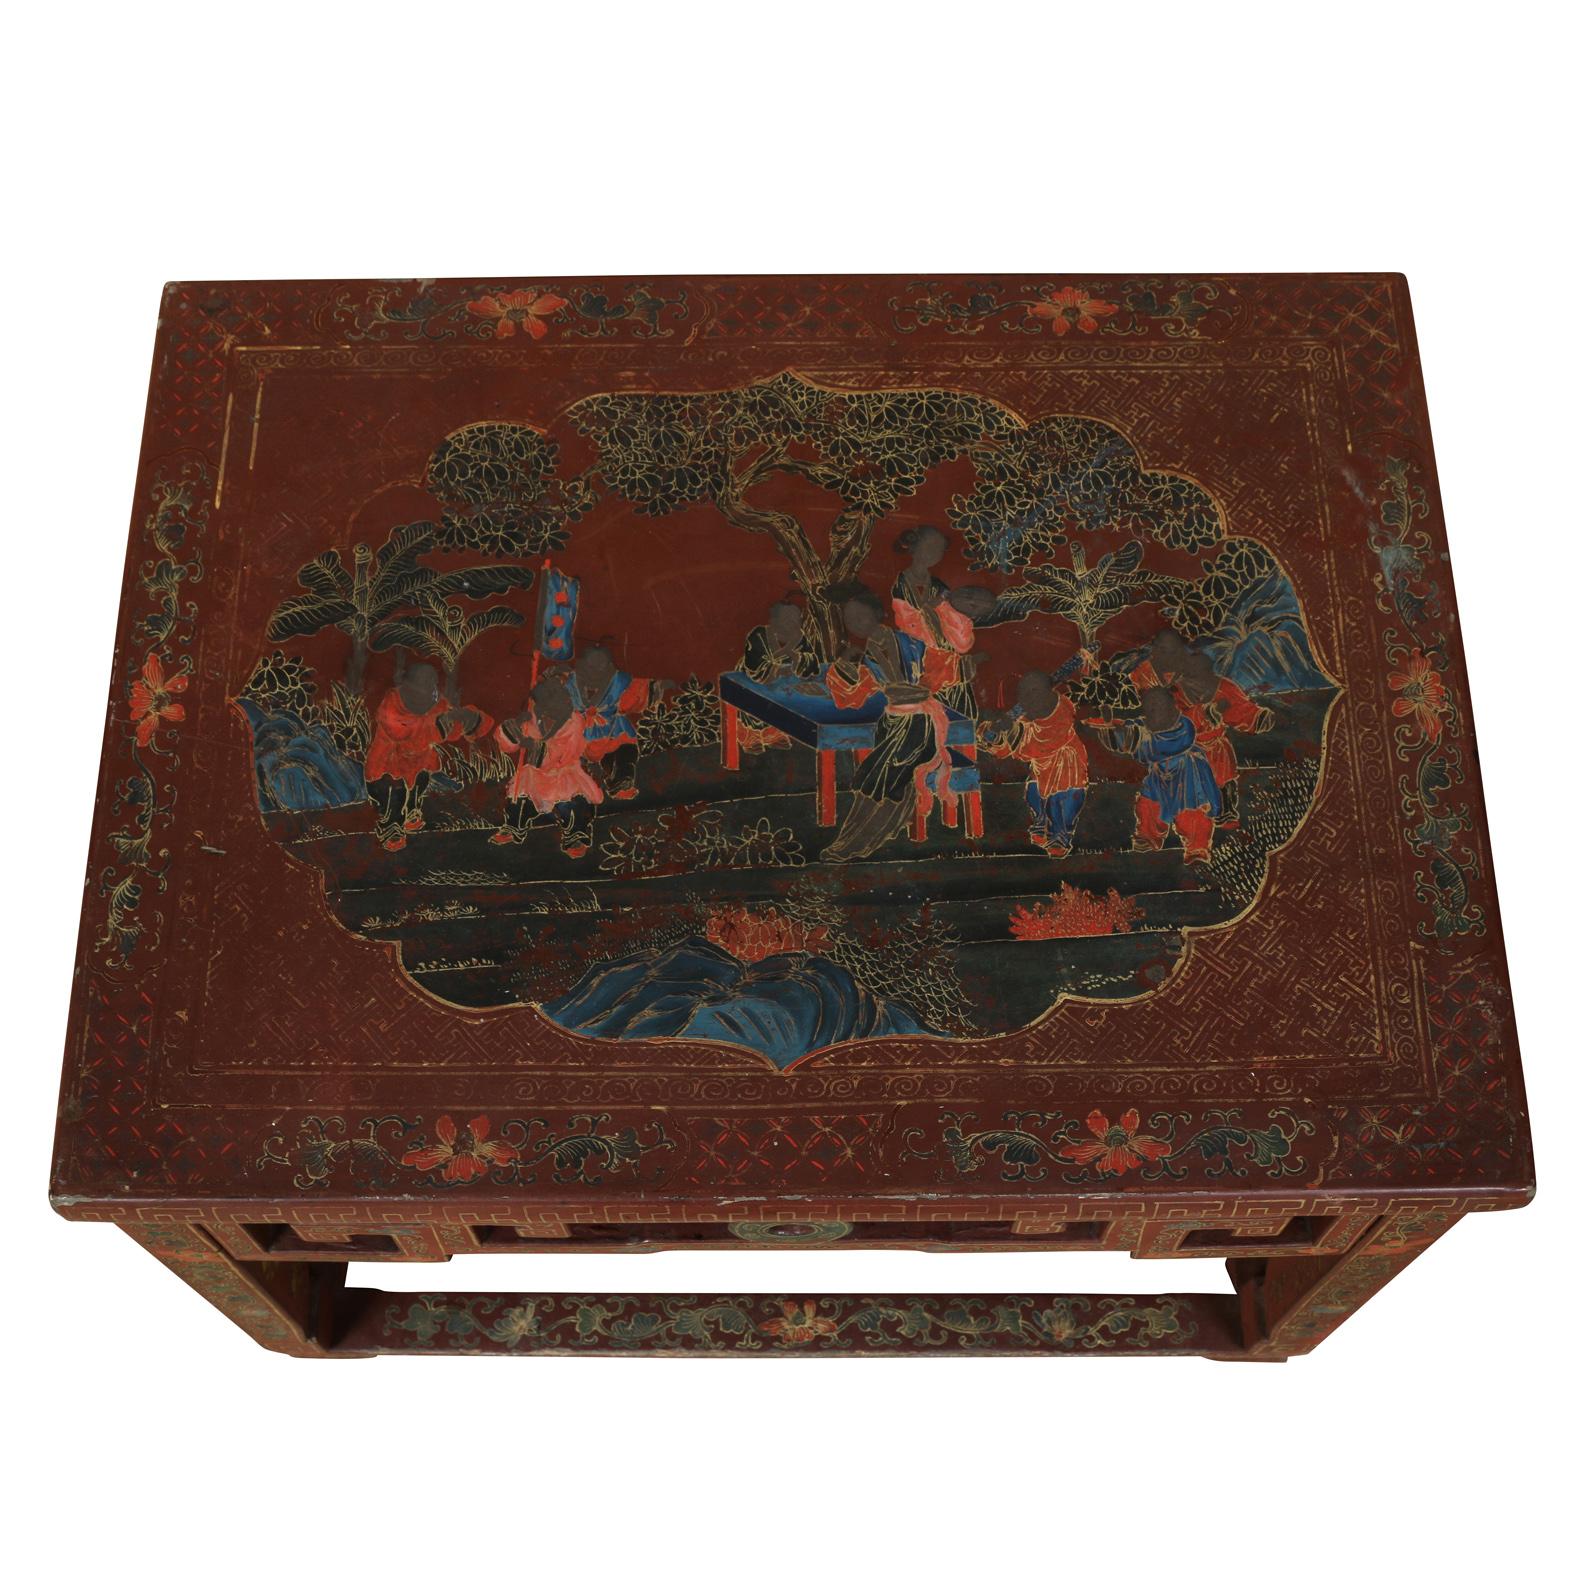 A Chinese red lacquered table with intricate gilt decoration depicturing flora, figures and geometric design and fretwork to sides.